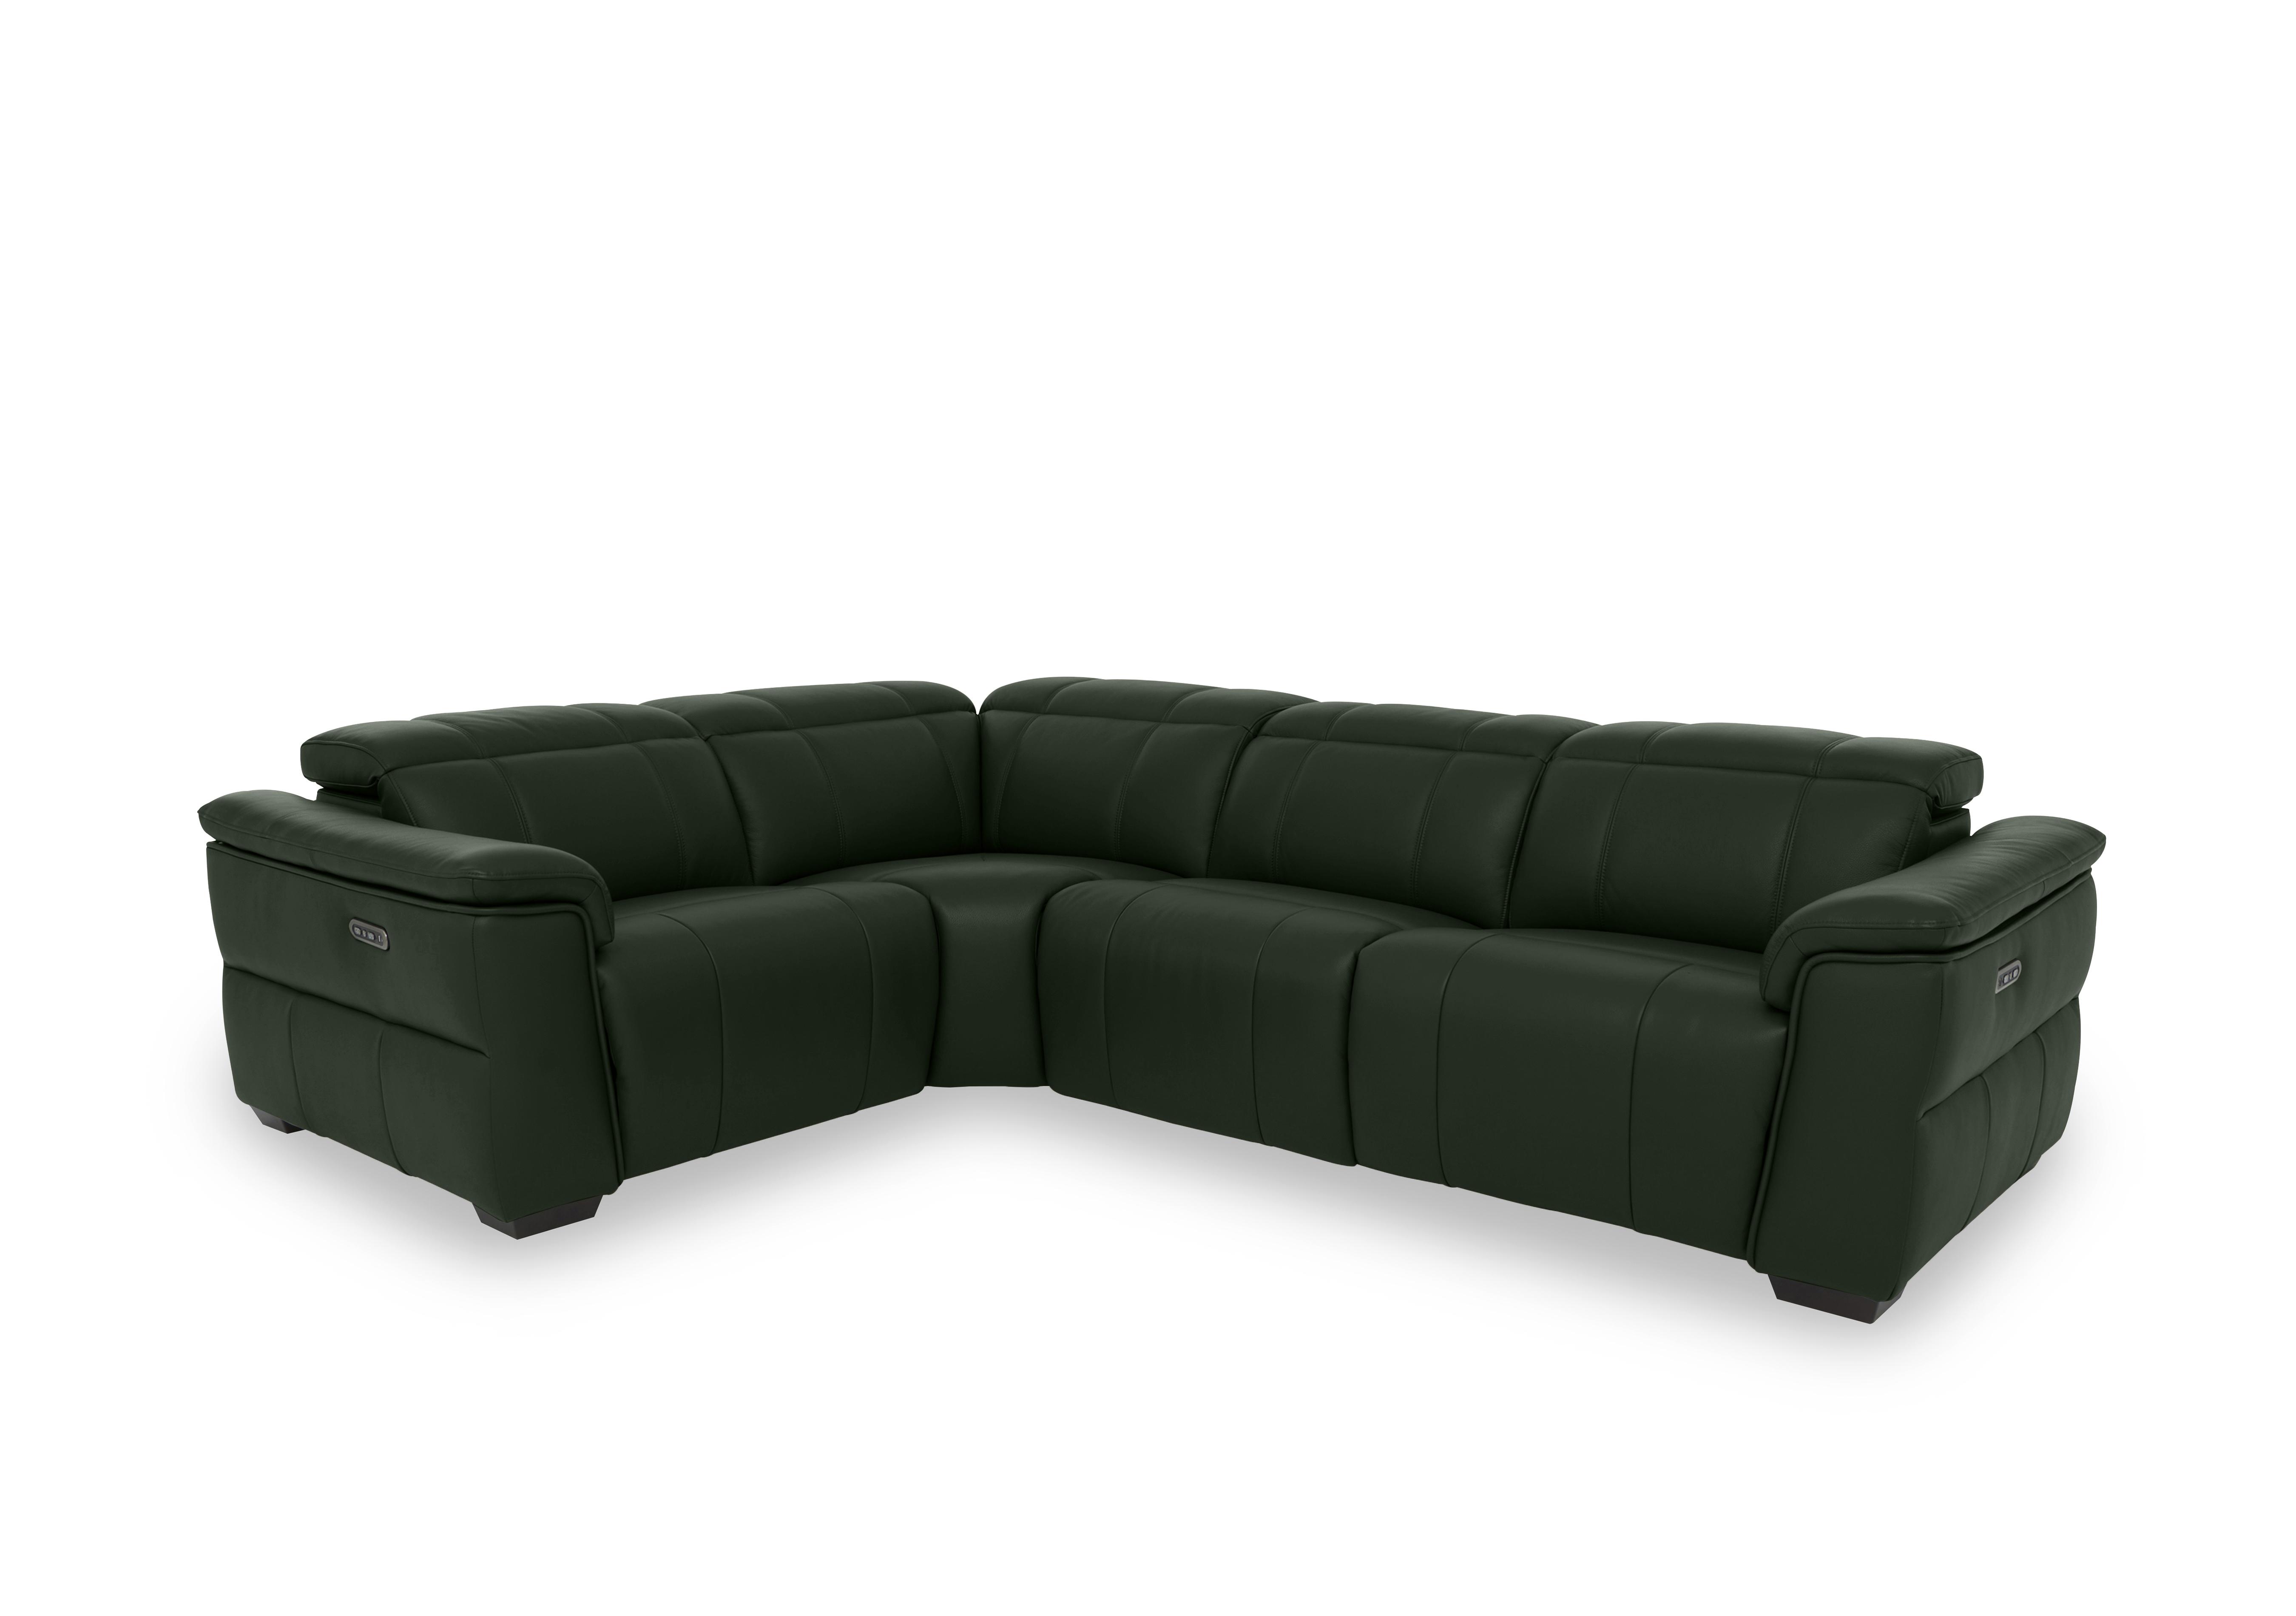 Inca Leather Double Power Recliner Corner Sofa with Power Headrests in Cat-40/10 Oslo Pine on Furniture Village